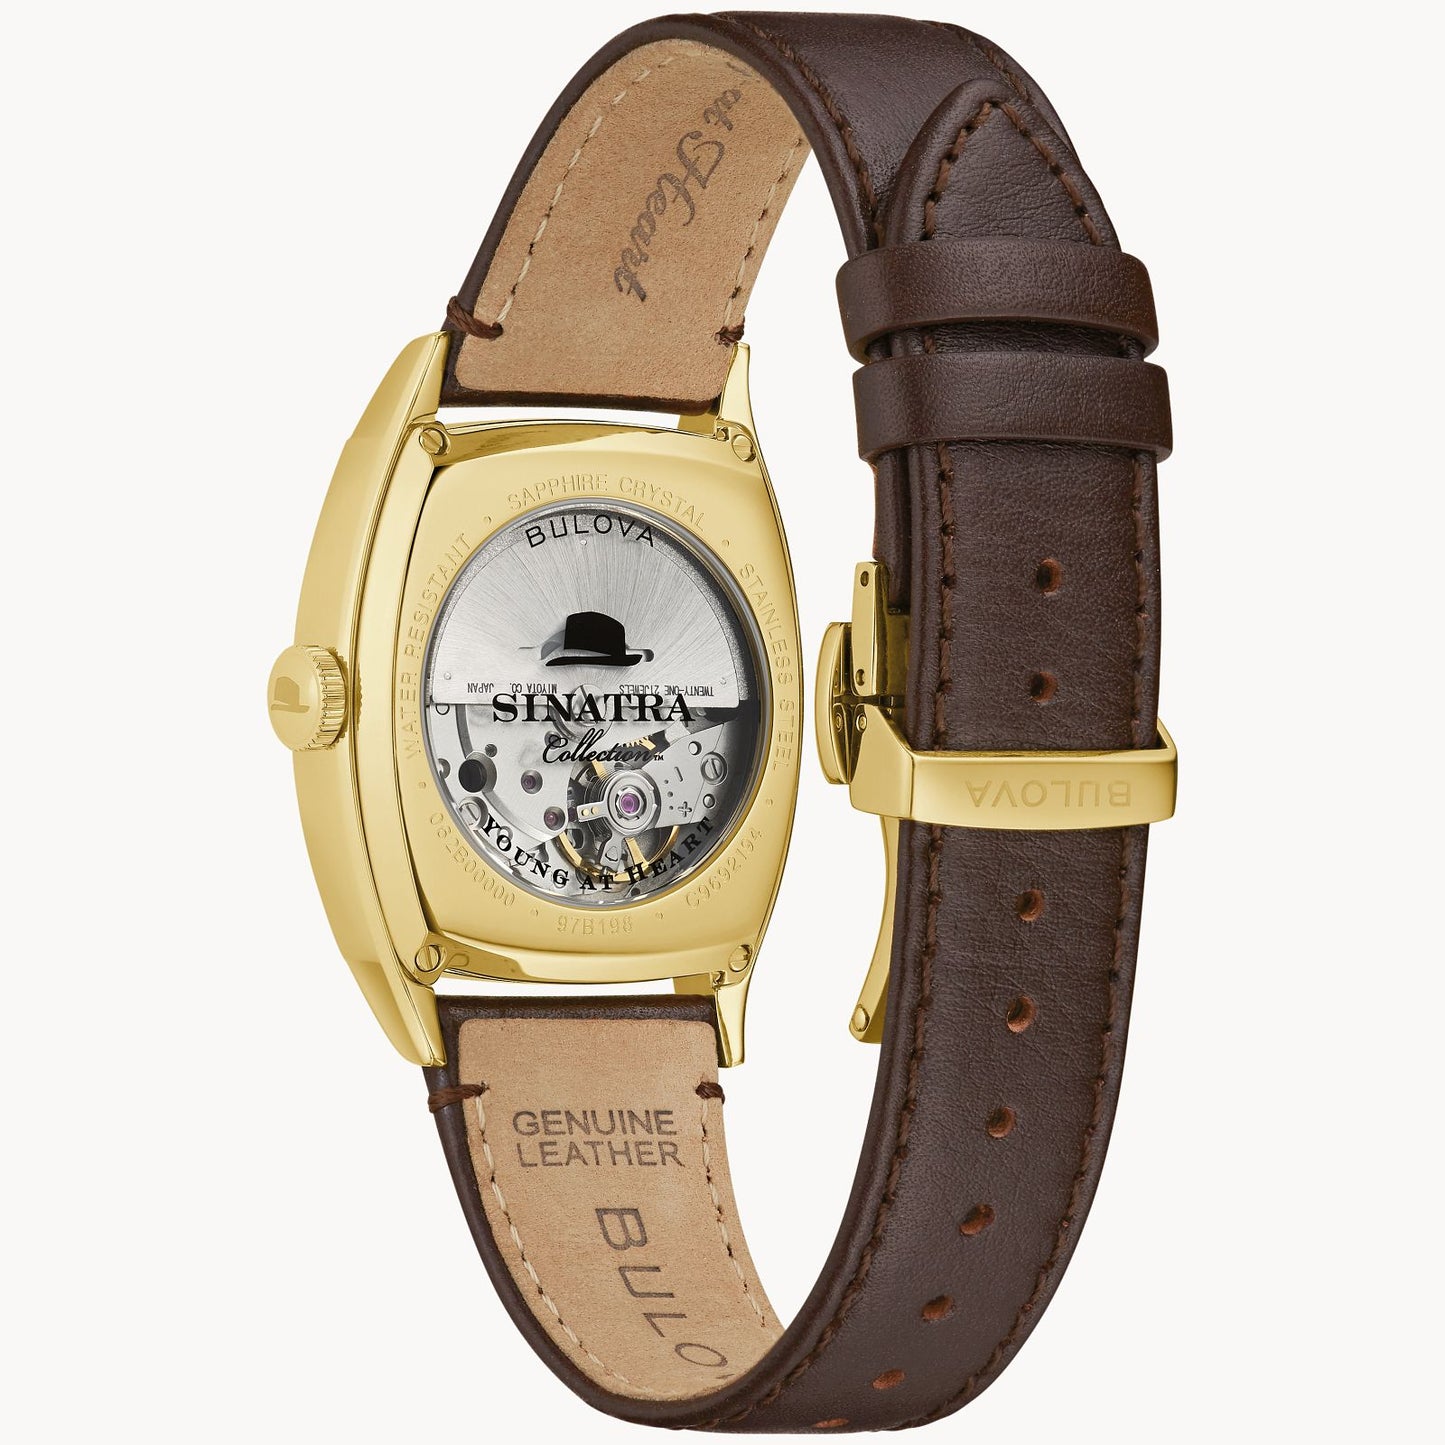 Bulova Frank Sinatra Young At Heart Leather Strap Watch